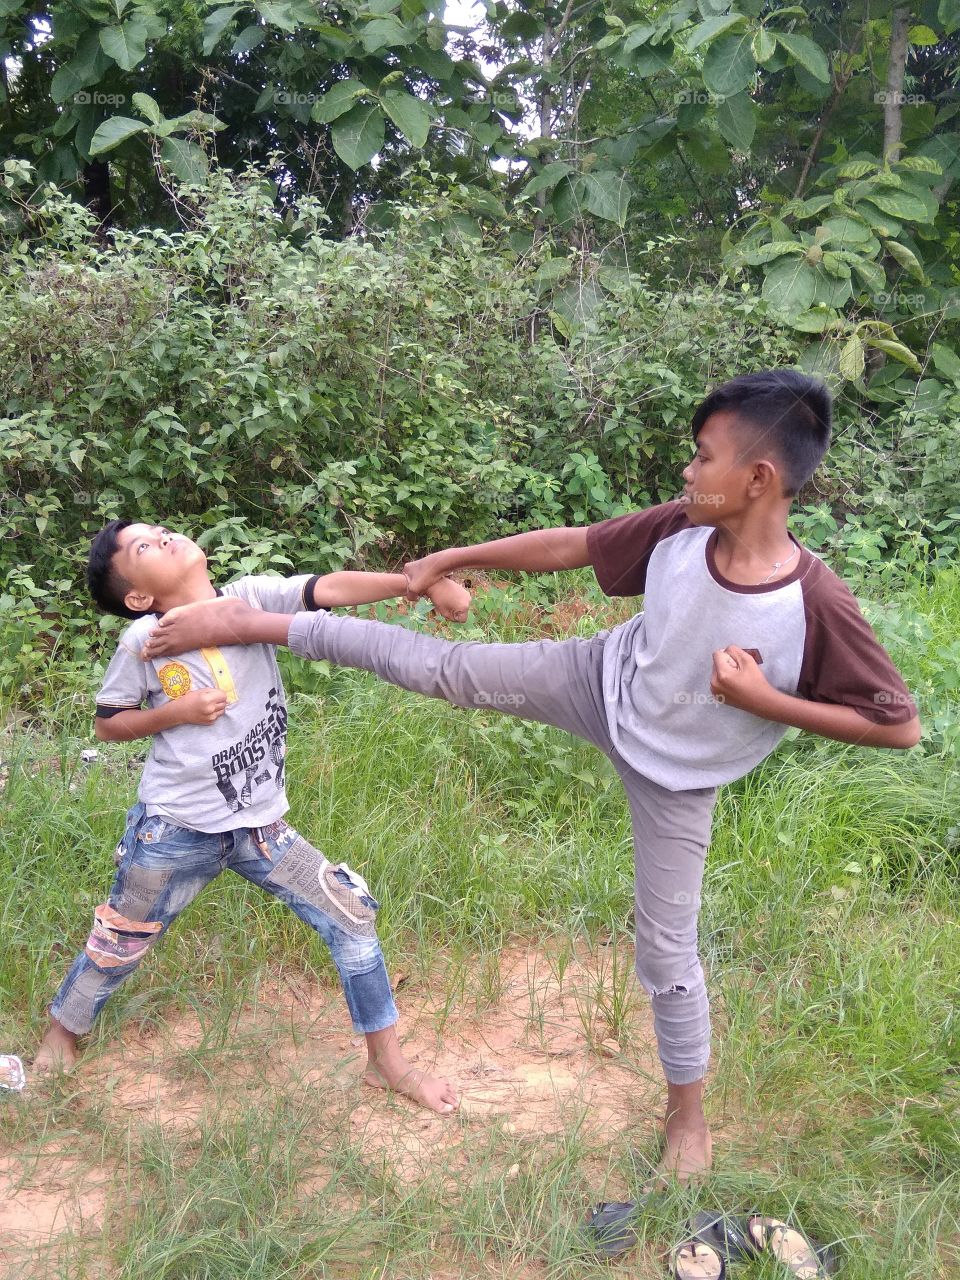 Another village kid acting silat